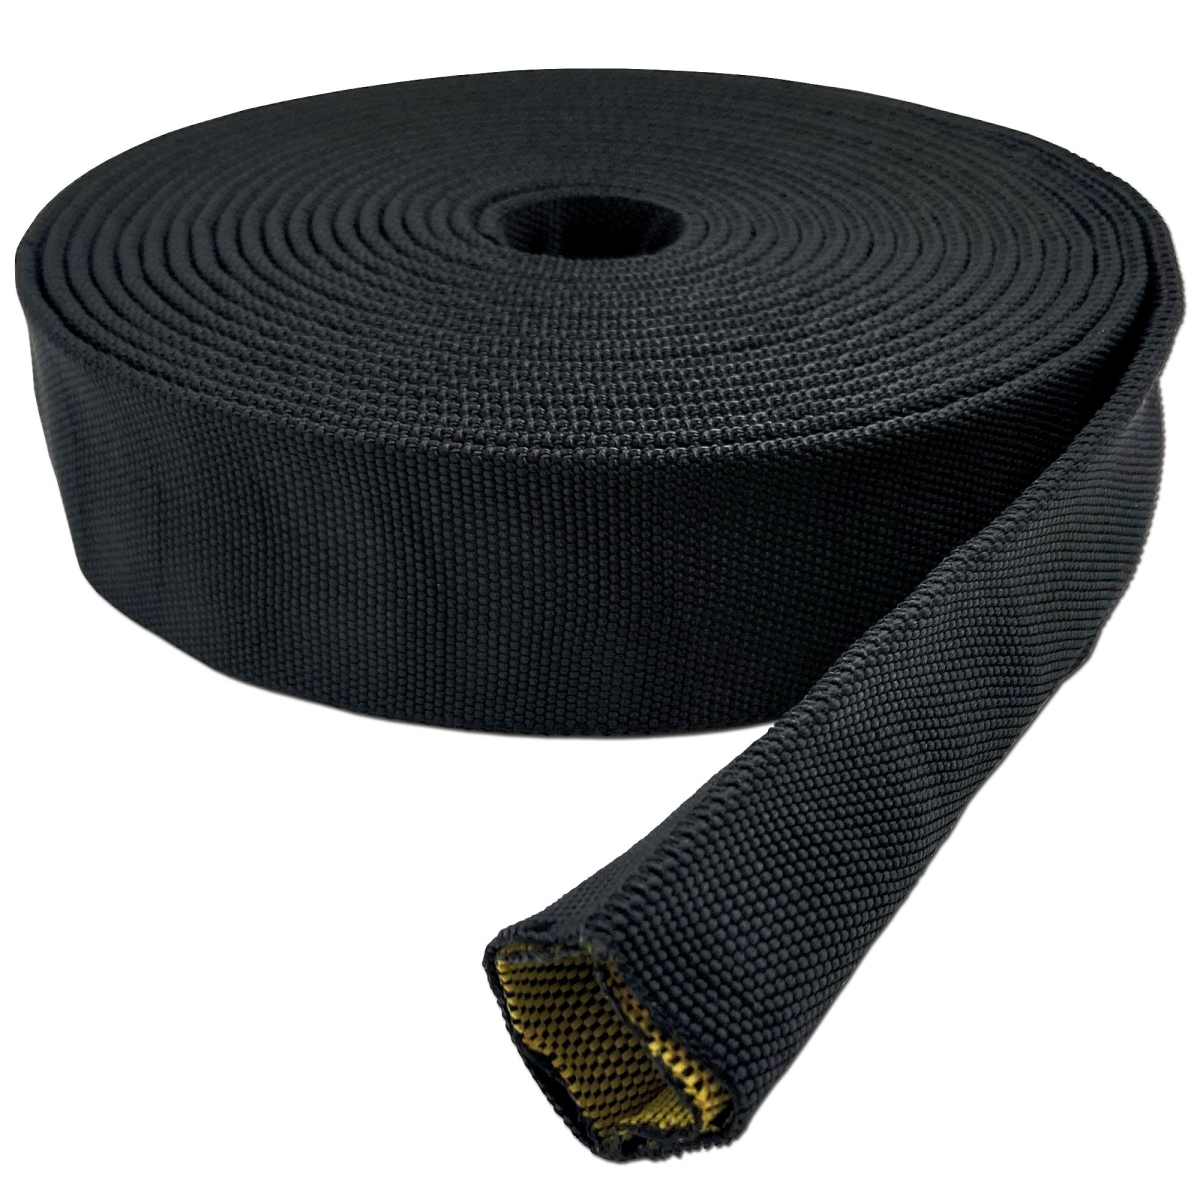 Picture of Electriduct BS-J-BURST-075-10-BK 0.75 in. x 10 ft. Burst Protection Multifilament Nylon Braided Sleeving - Black